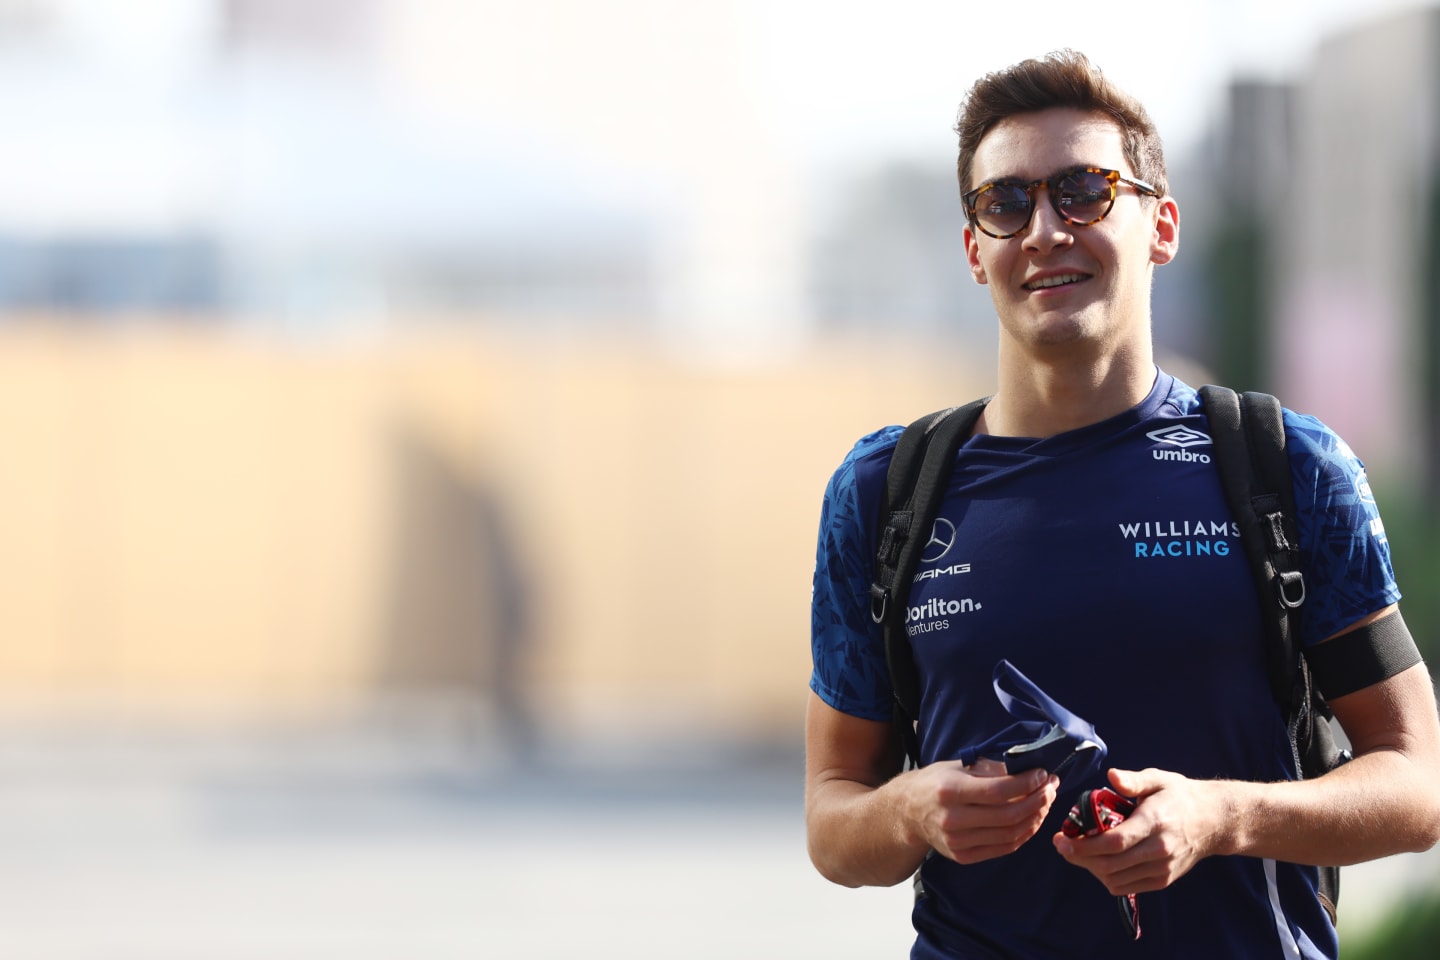 JEDDAH, SAUDI ARABIA - DECEMBER 03: George Russell of Great Britain and Williams walks in the Paddock before practice ahead of the F1 Grand Prix of Saudi Arabia at Jeddah Corniche Circuit on December 03, 2021 in Jeddah, Saudi Arabia. (Photo by Mark Thompson/Getty Images)